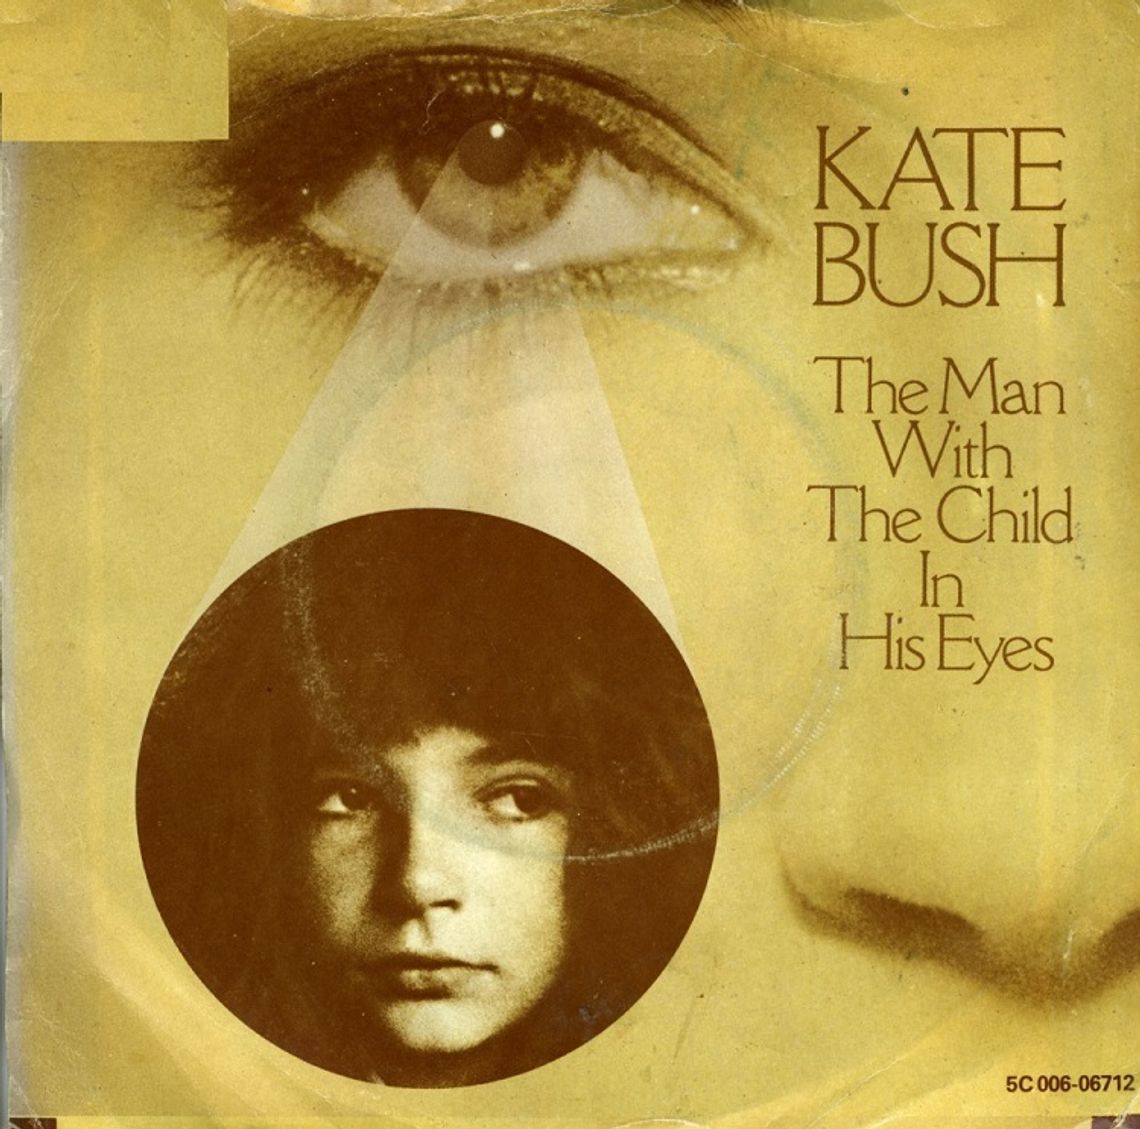 KATE BUSH "Man with a child in his eyes"